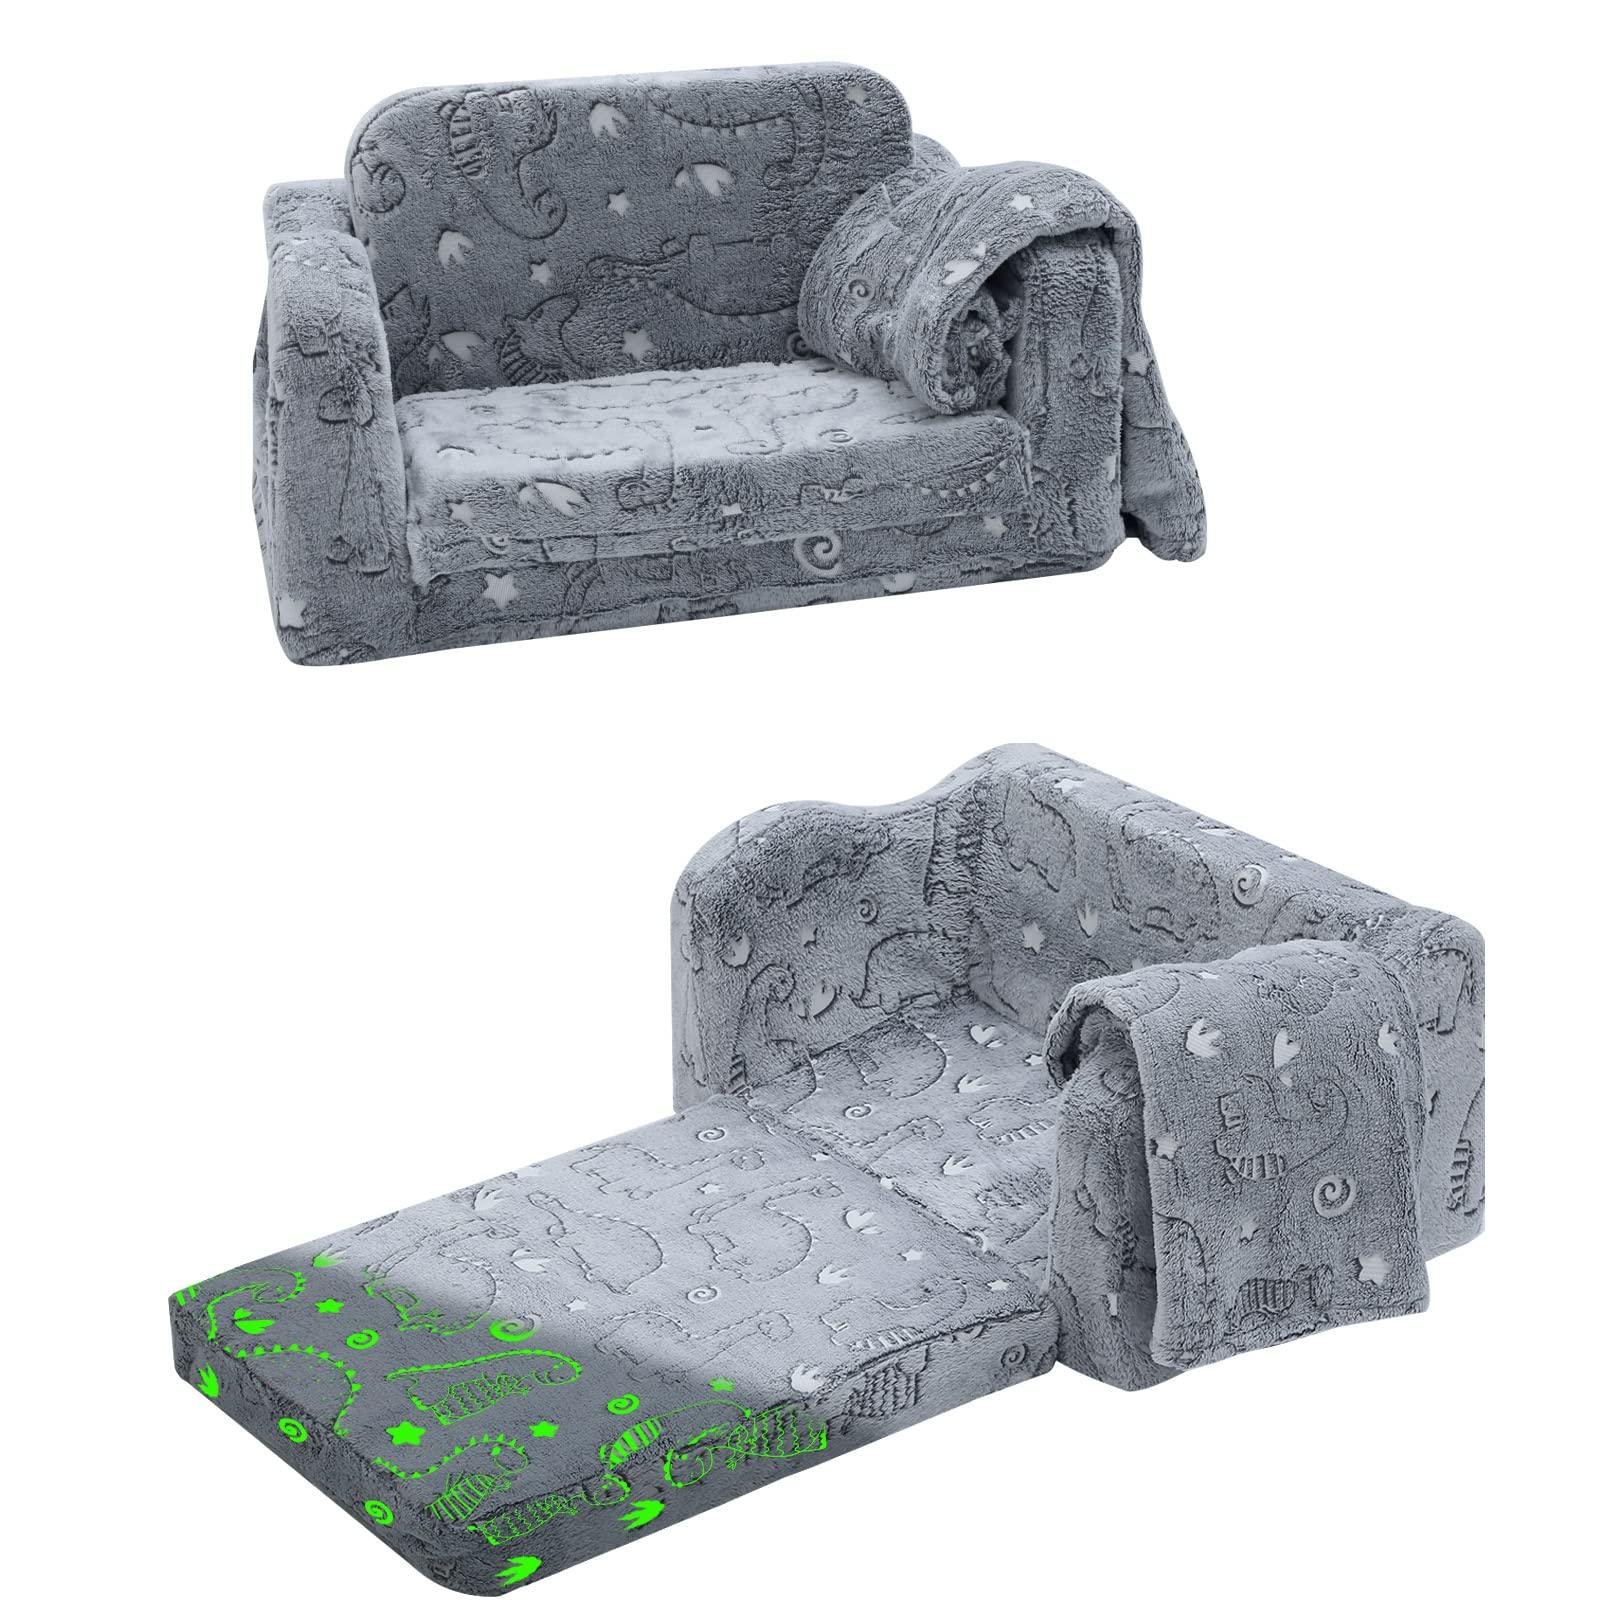 Kids Couch Flip Out Sofa Chair